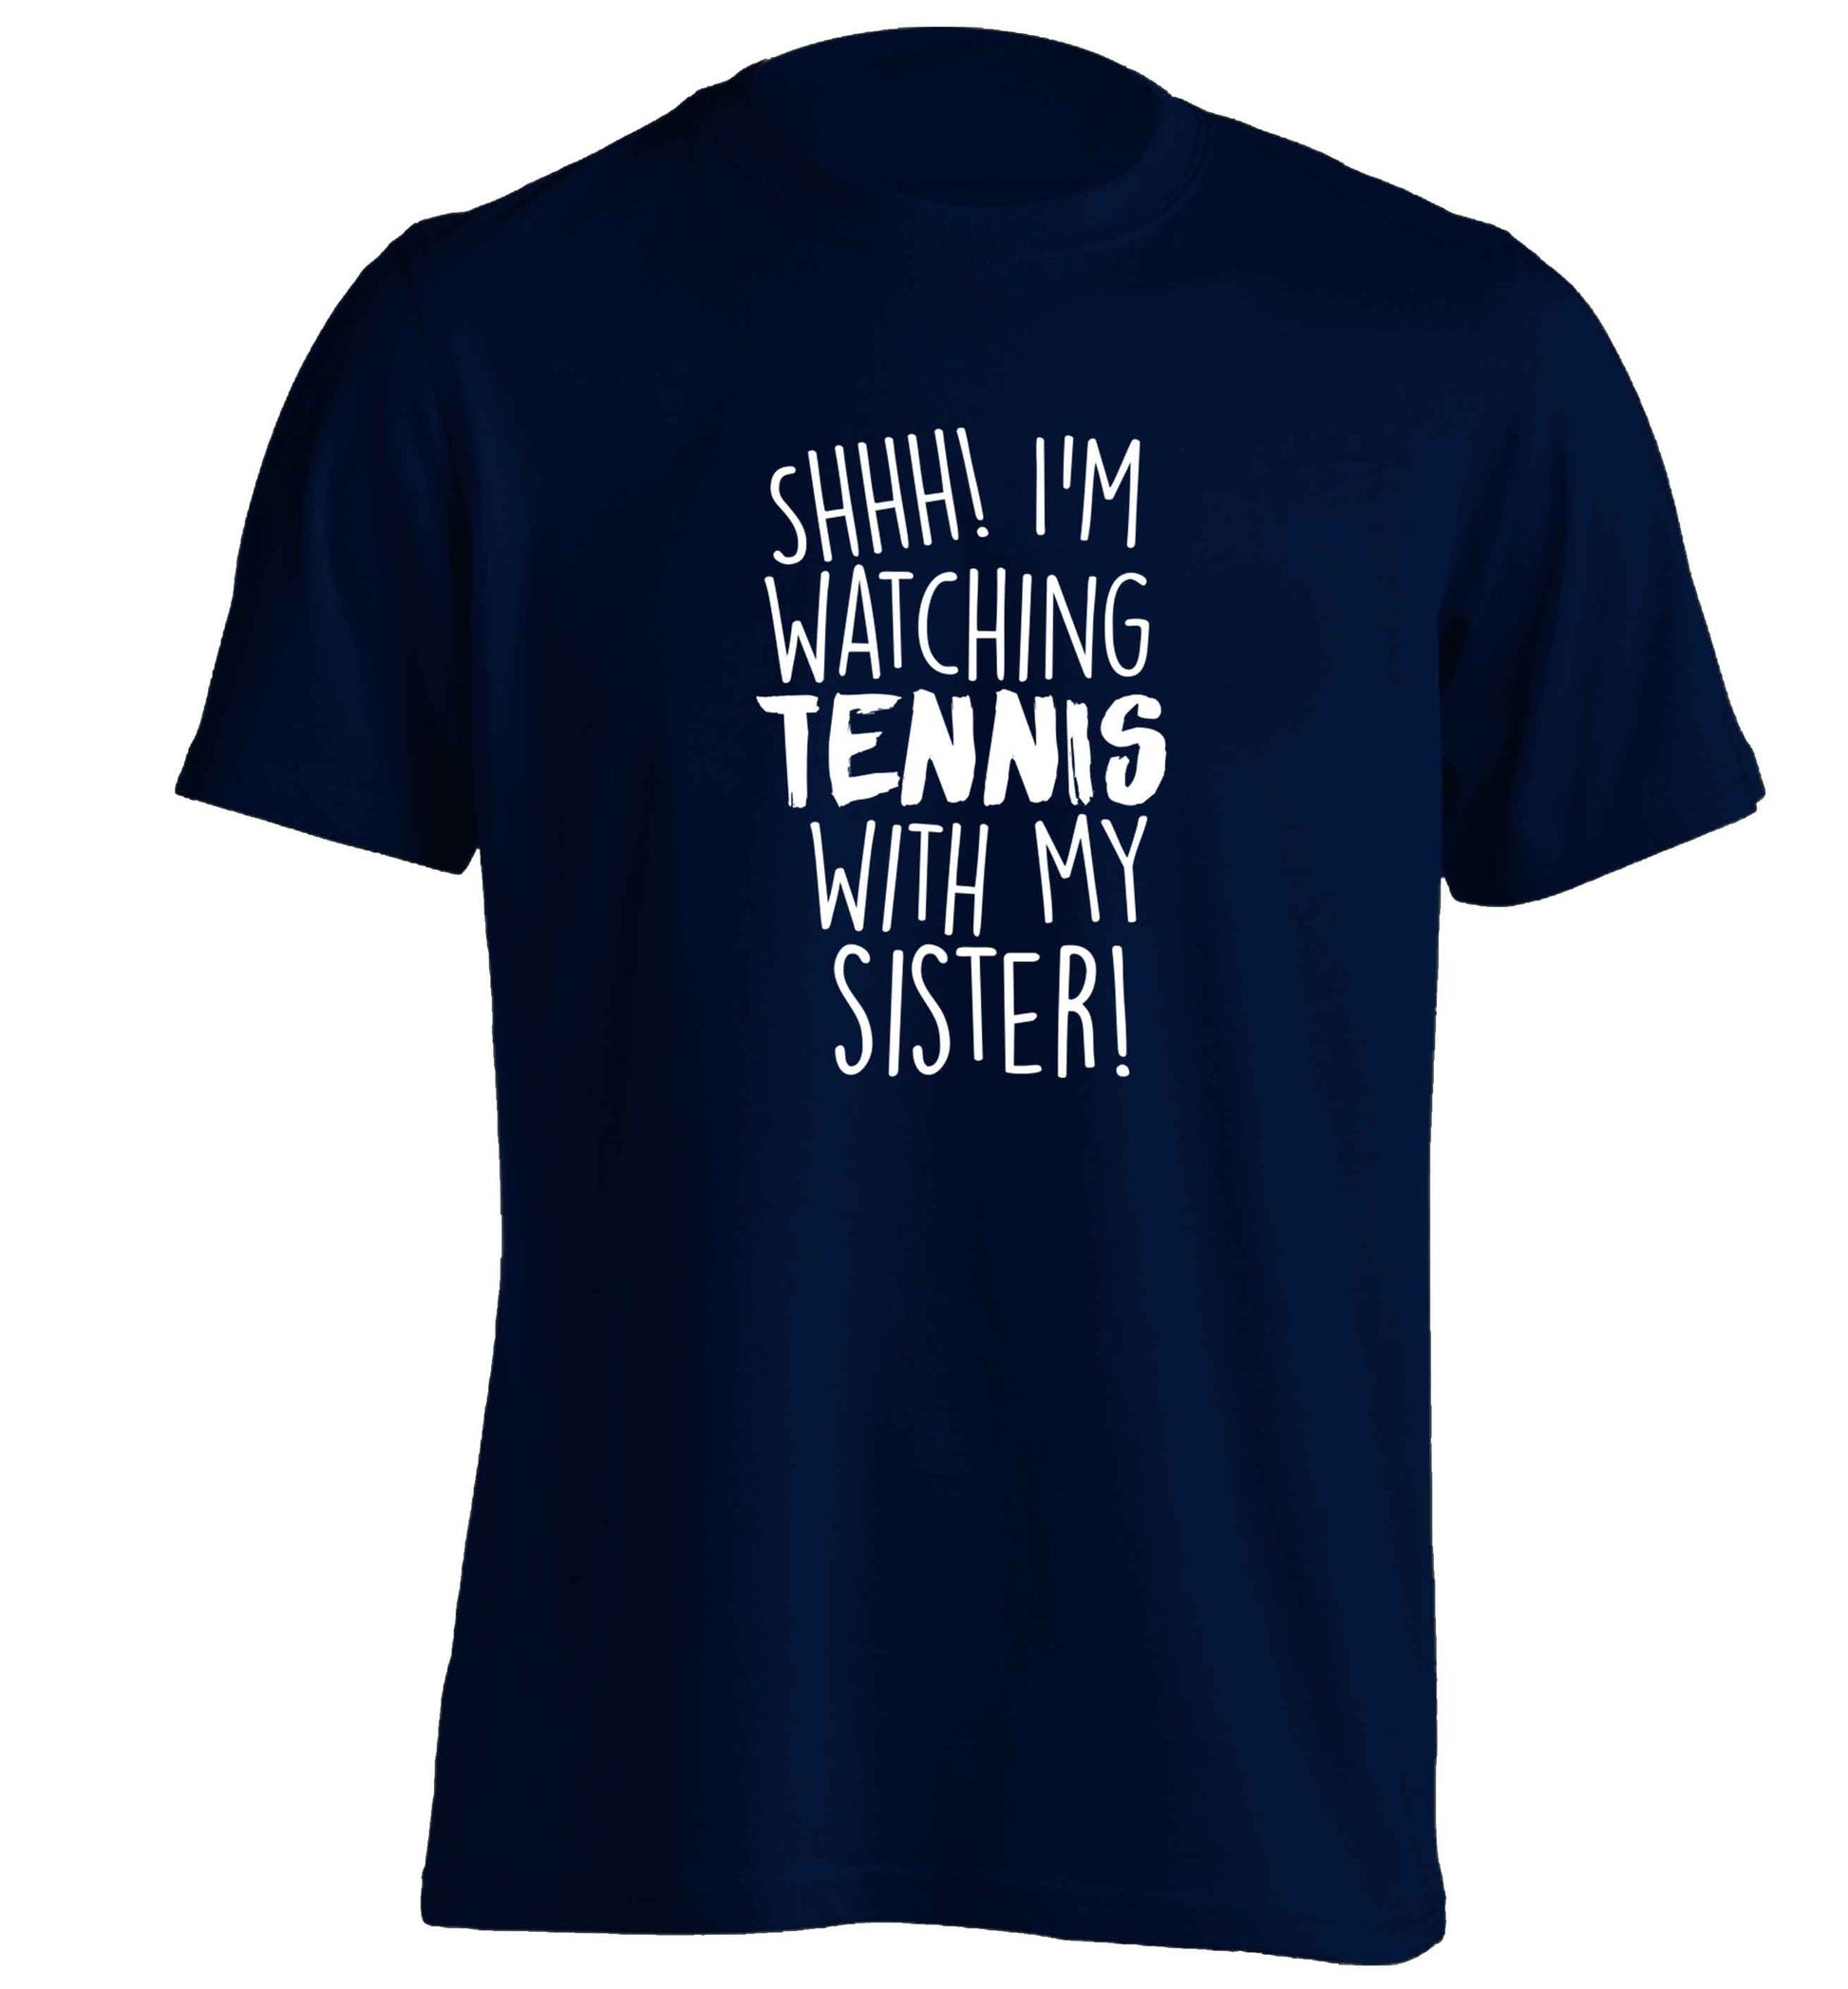 Shh! I'm watching tennis with my sister! adults unisex navy Tshirt 2XL